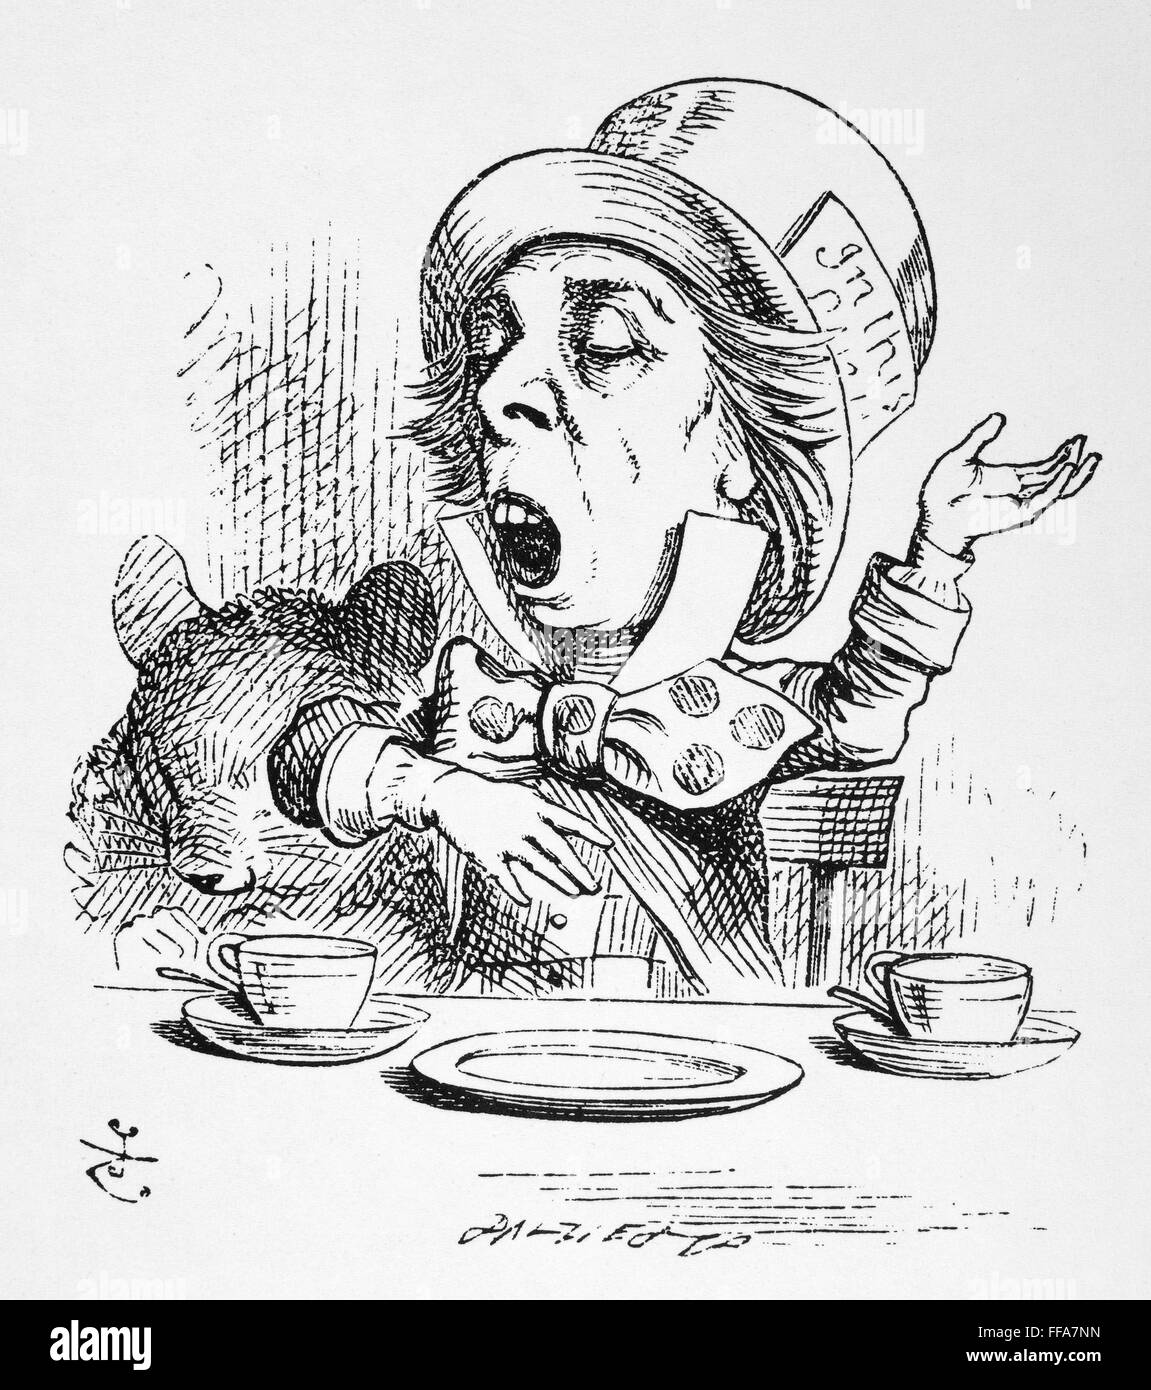 CARROLL: ALICE, 1865. /nThe Mad Tea Party. Illustration by John Tenniel from the first edition of Lewis Carroll's 'Alice's Adventures in Wonderland,' 1865. Stock Photo